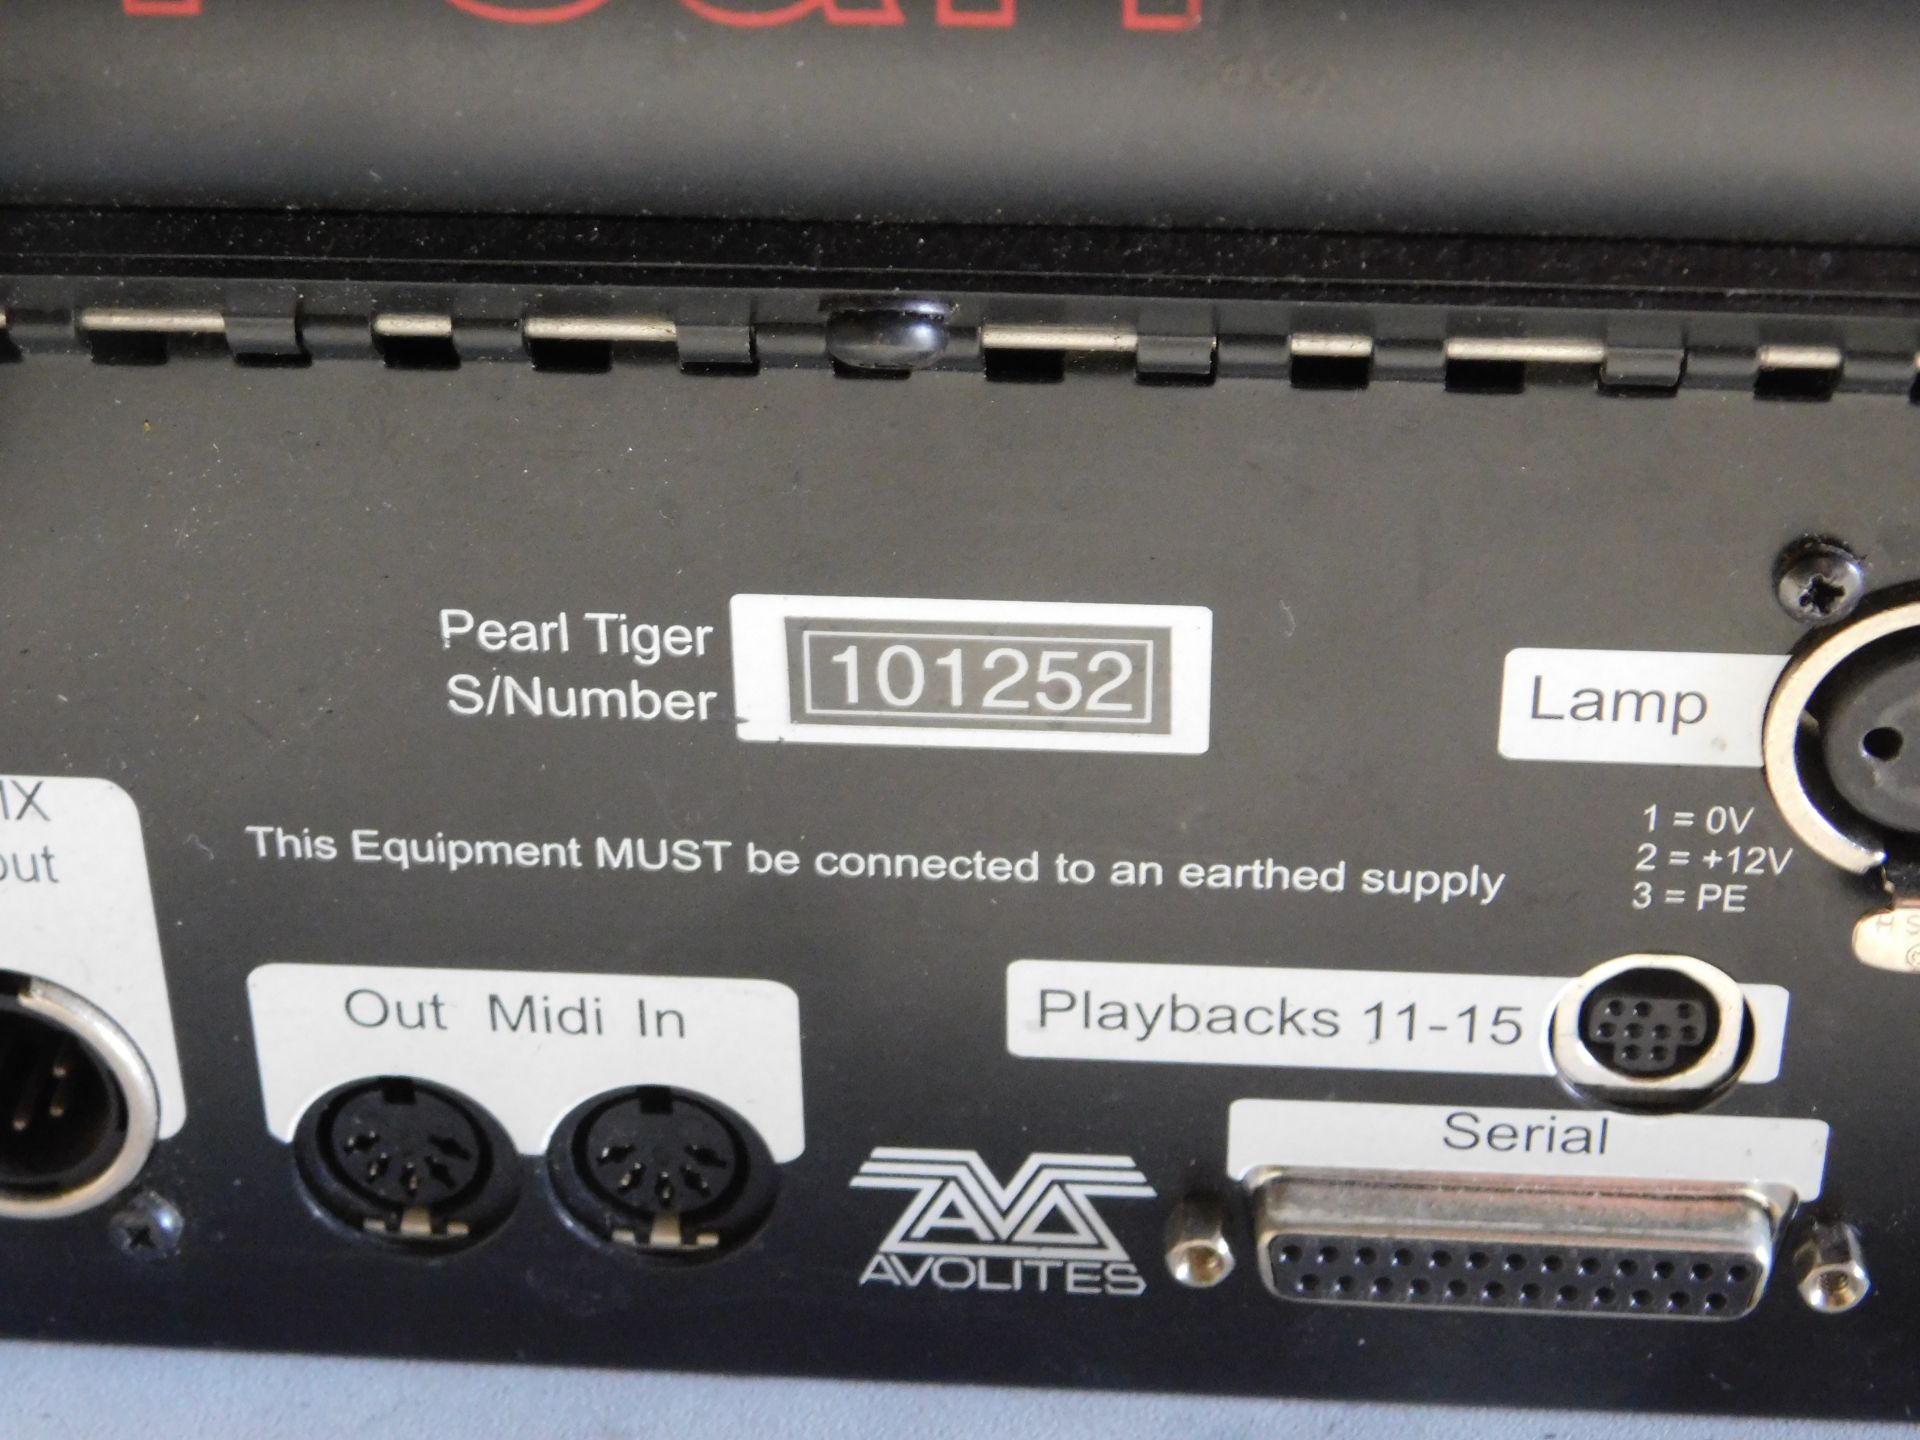 Avolites Pearl Tiger 30 Channel Sound Mixer, Serial No 101564 (Marked “Faulty”) in Flight Case ( - Image 3 of 3